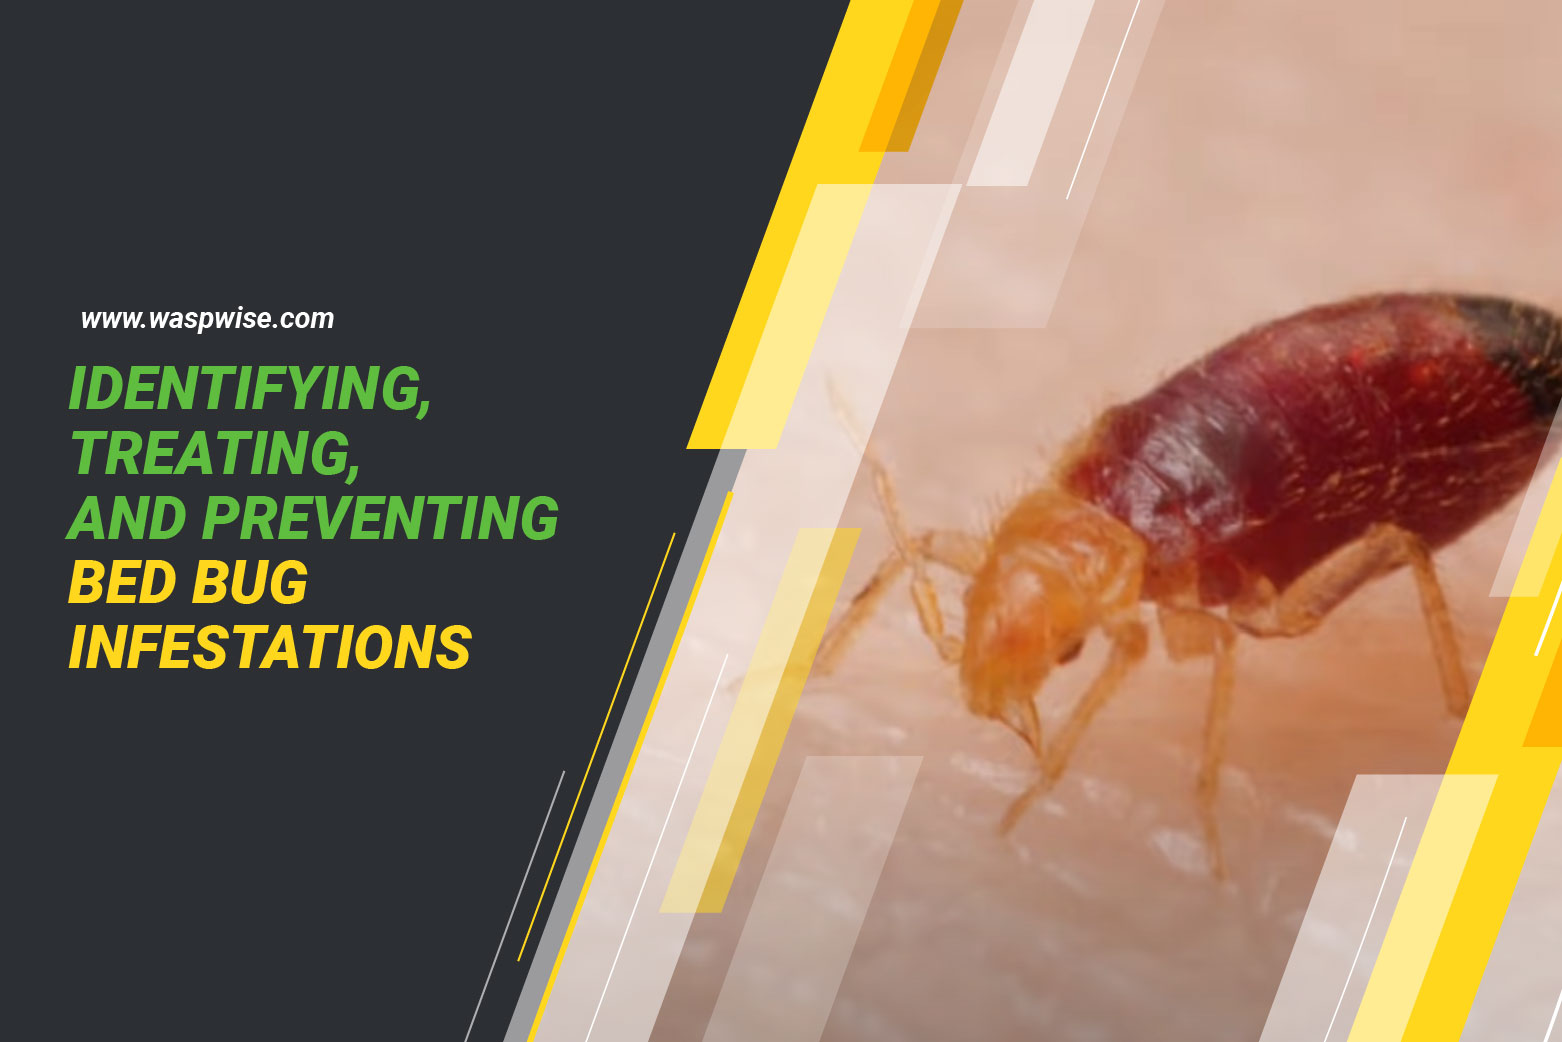 Identifying and treating bed bug infestation